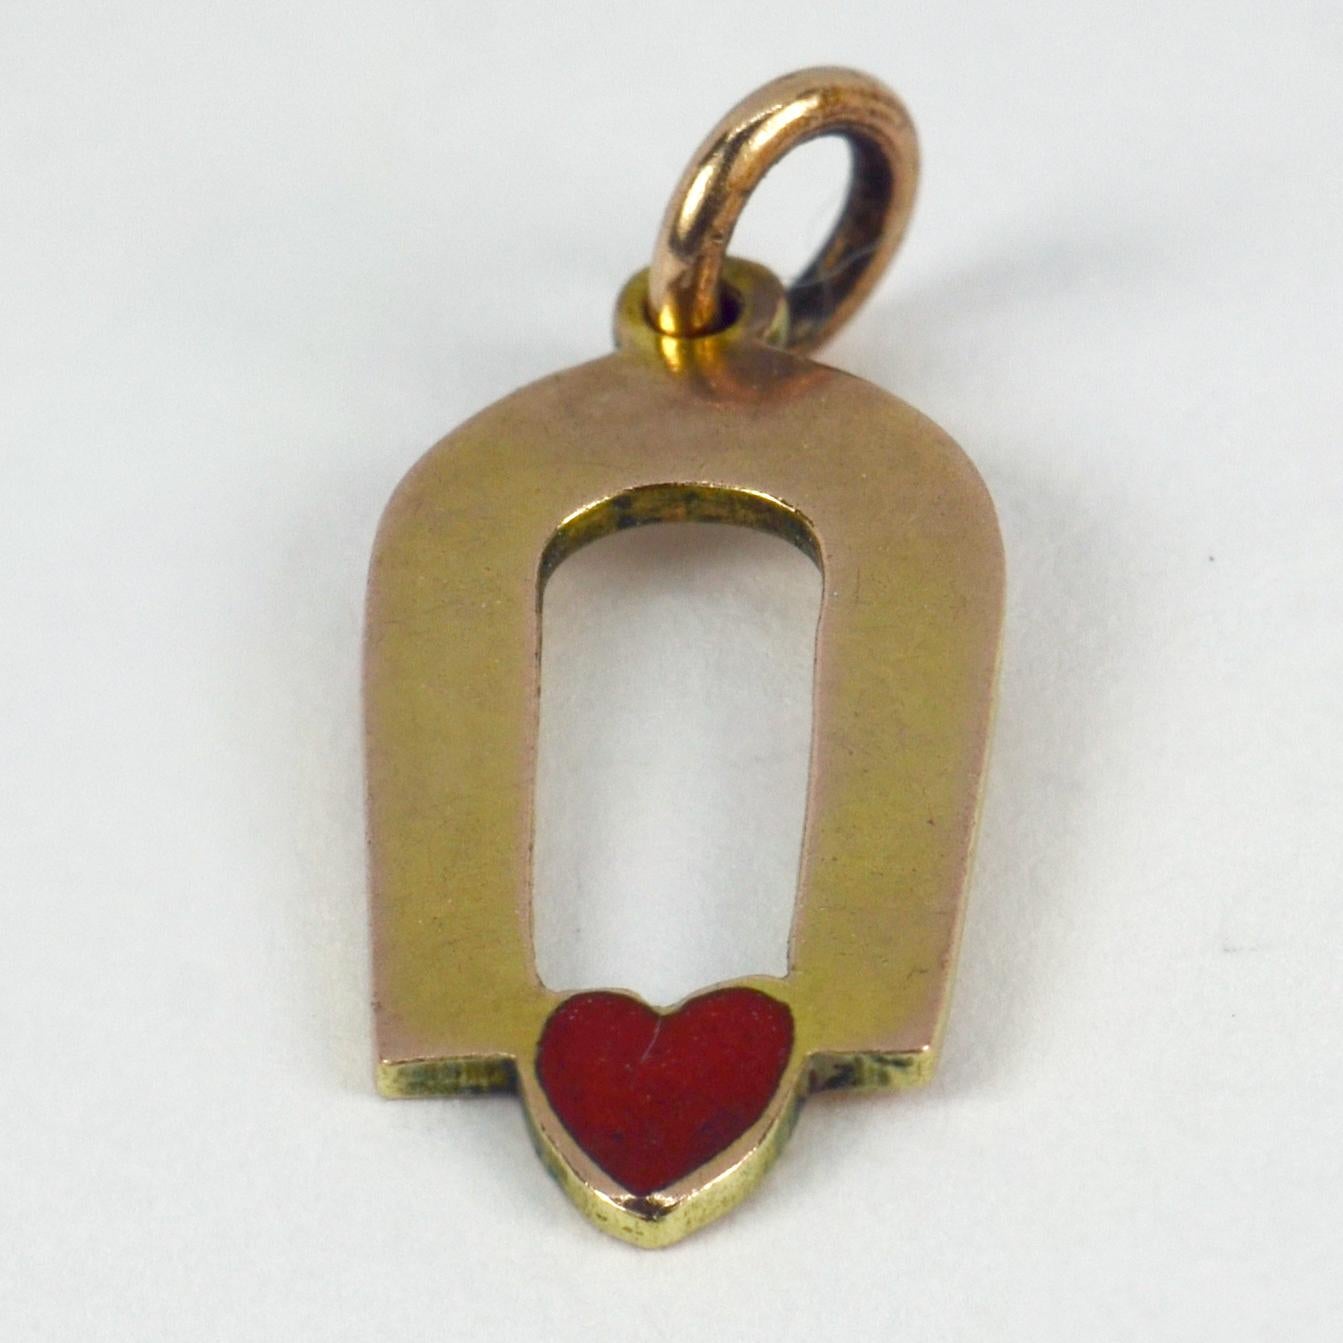 A 9 karat (9K) yellow gold charm pendant designed as a magnet attracted to a red enamel love heart. Stamped 9ct for 9 karat gold. 

Dimensions: 1.8 x 0.9 x 0.1 cm (not including jump ring)
Weight: 0.84 grams
